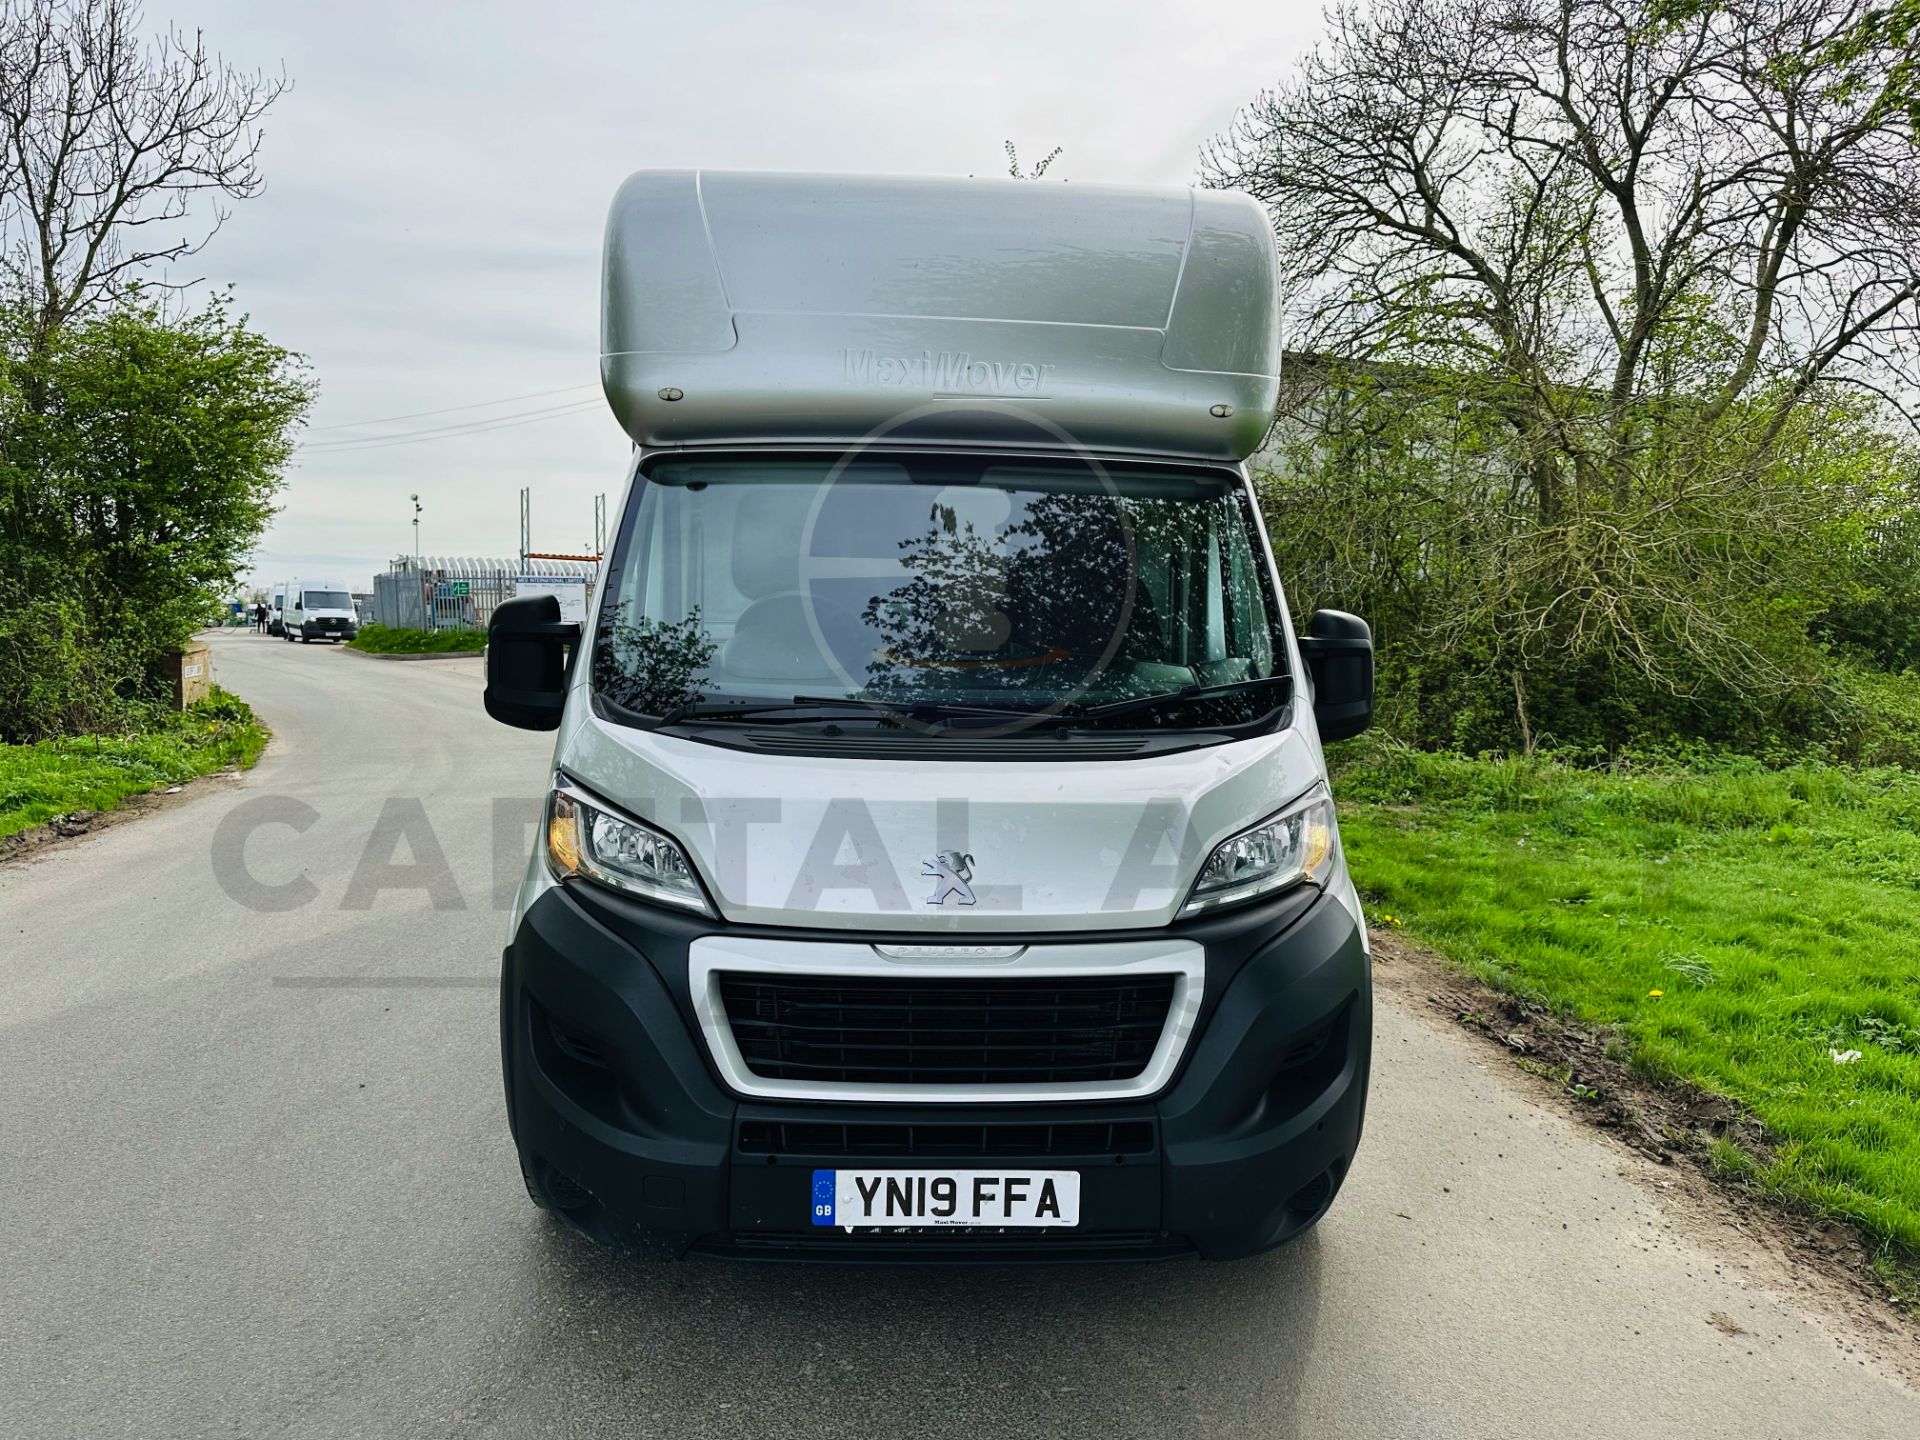 (ON SALE) PEUGEOT BOXER 335 *LWB LOW LOADER / MAXI MOVER LUTON* (2019 - EURO 6) 2.0 BLUE HDI *A/C* - Image 3 of 27